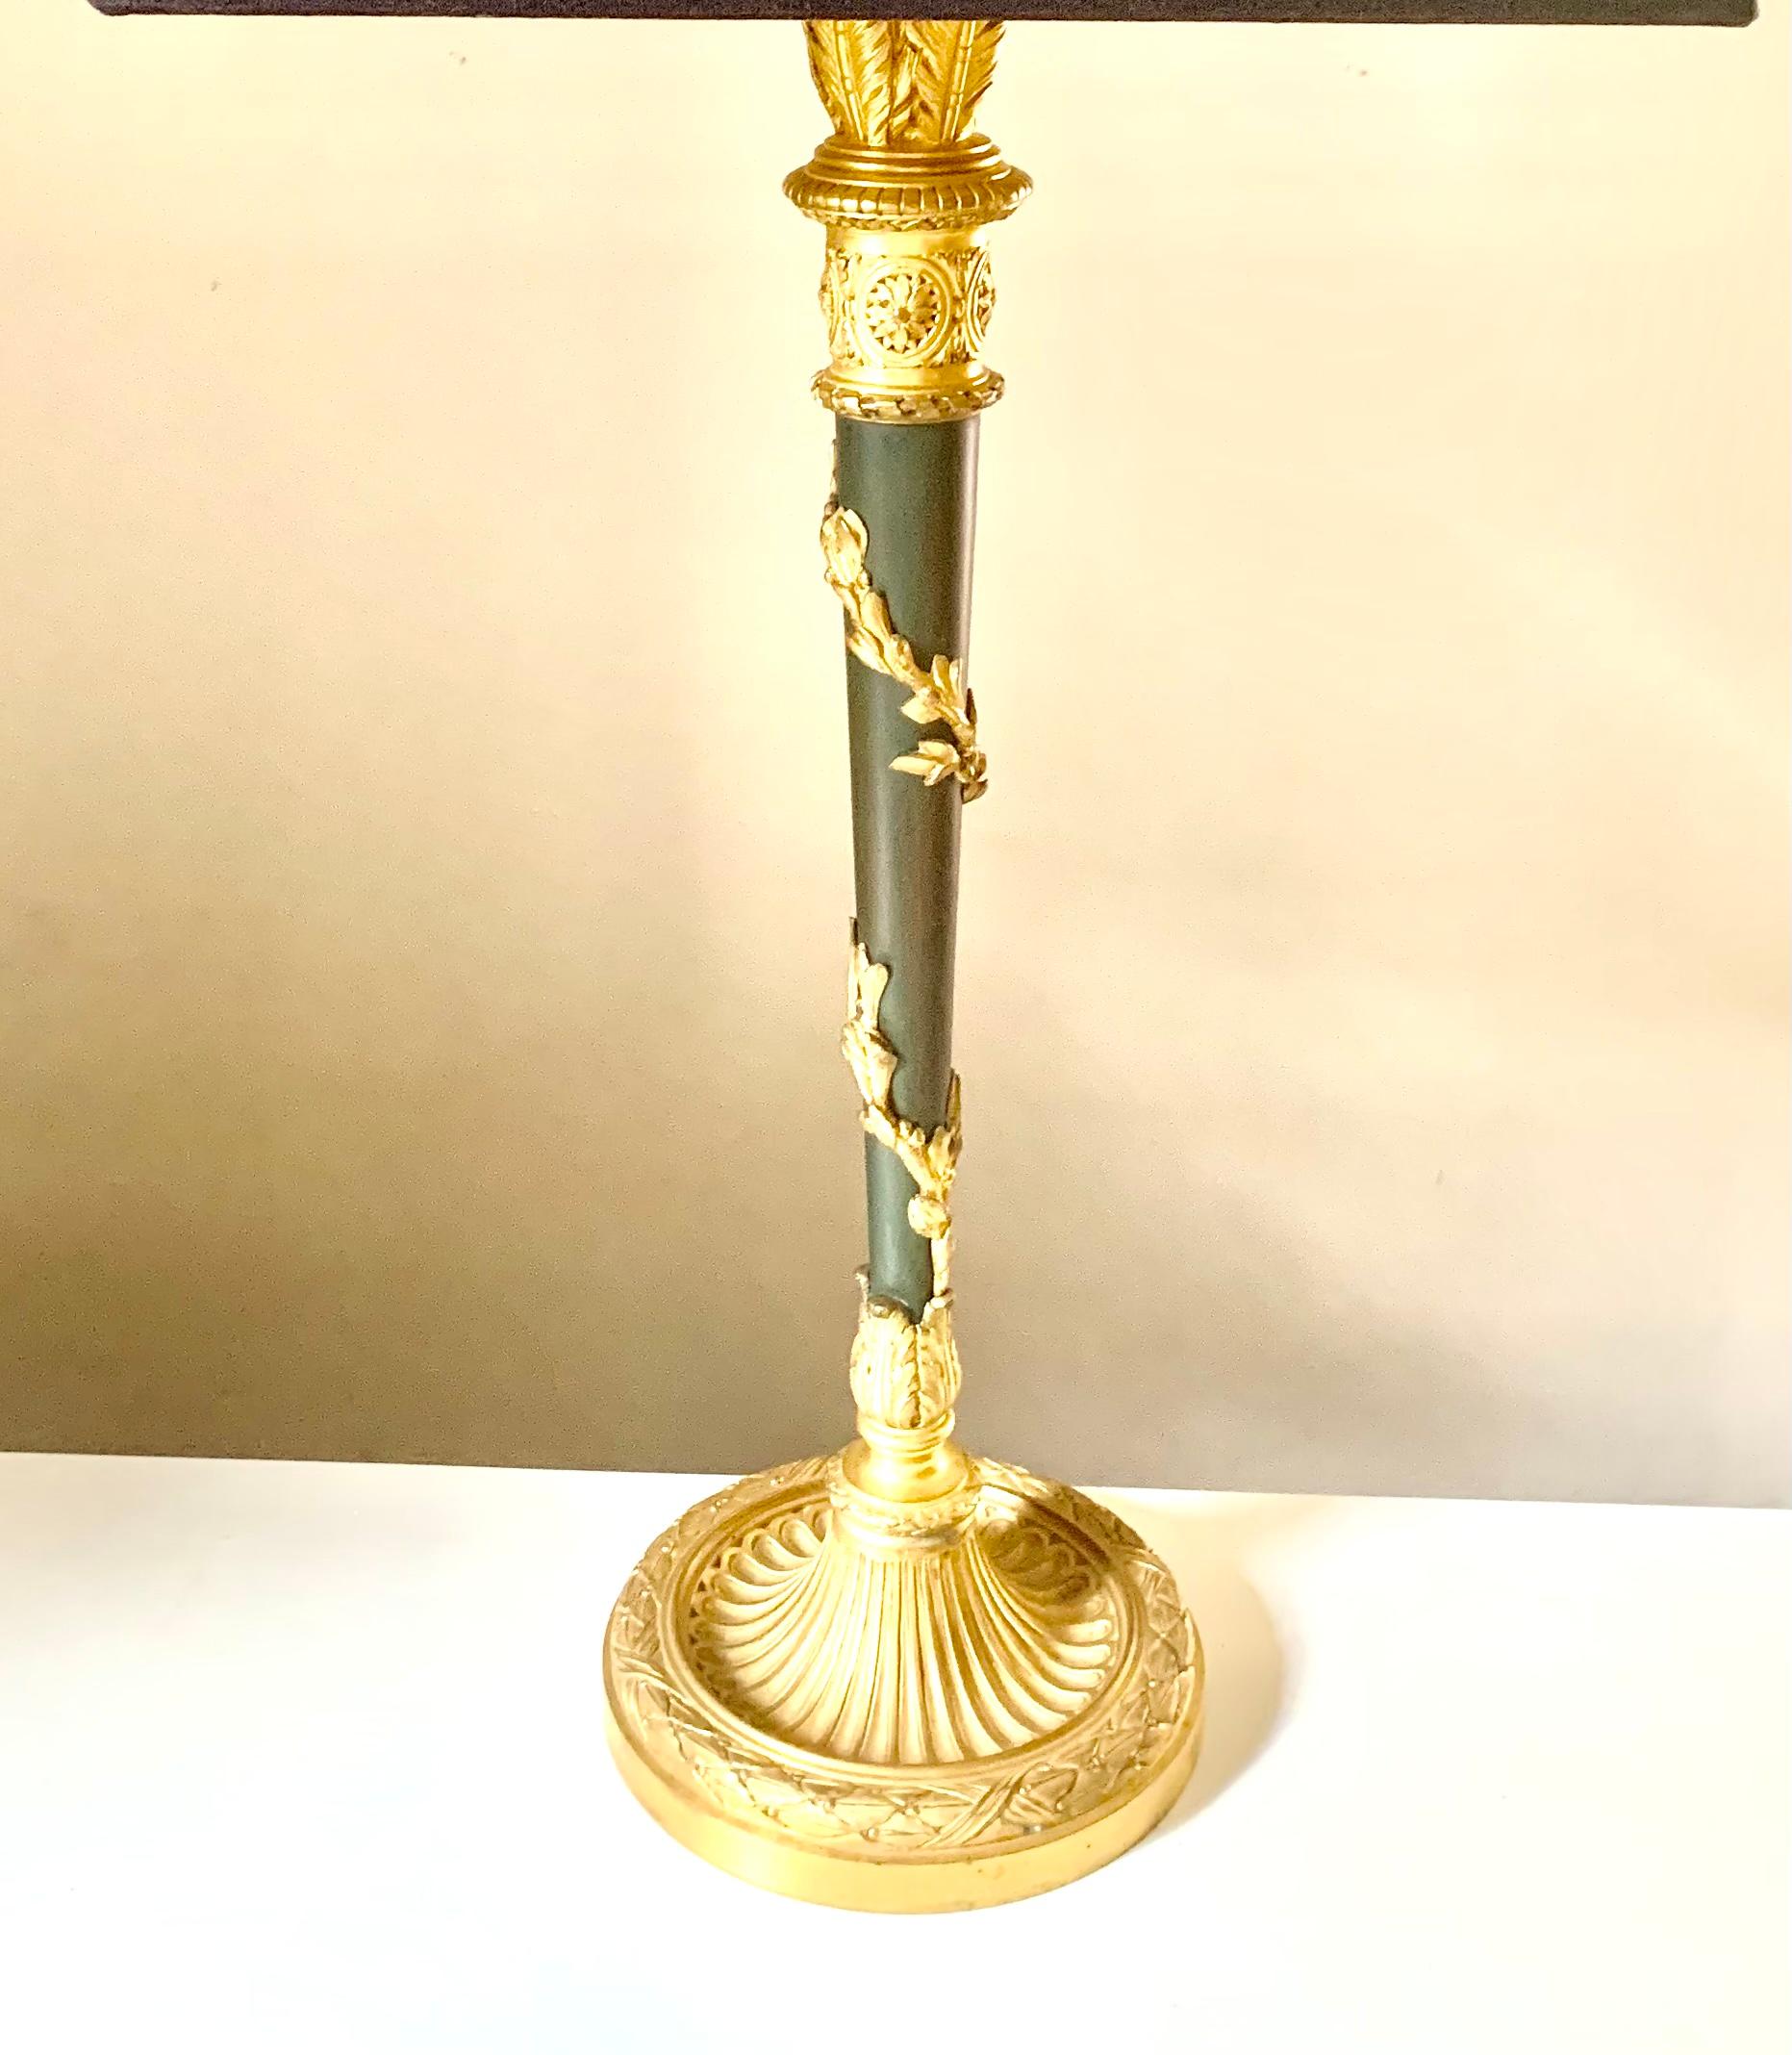 Fine Antique French Neoclassical Style Gilt and Patinated Bronze Desk Lamp For Sale 3